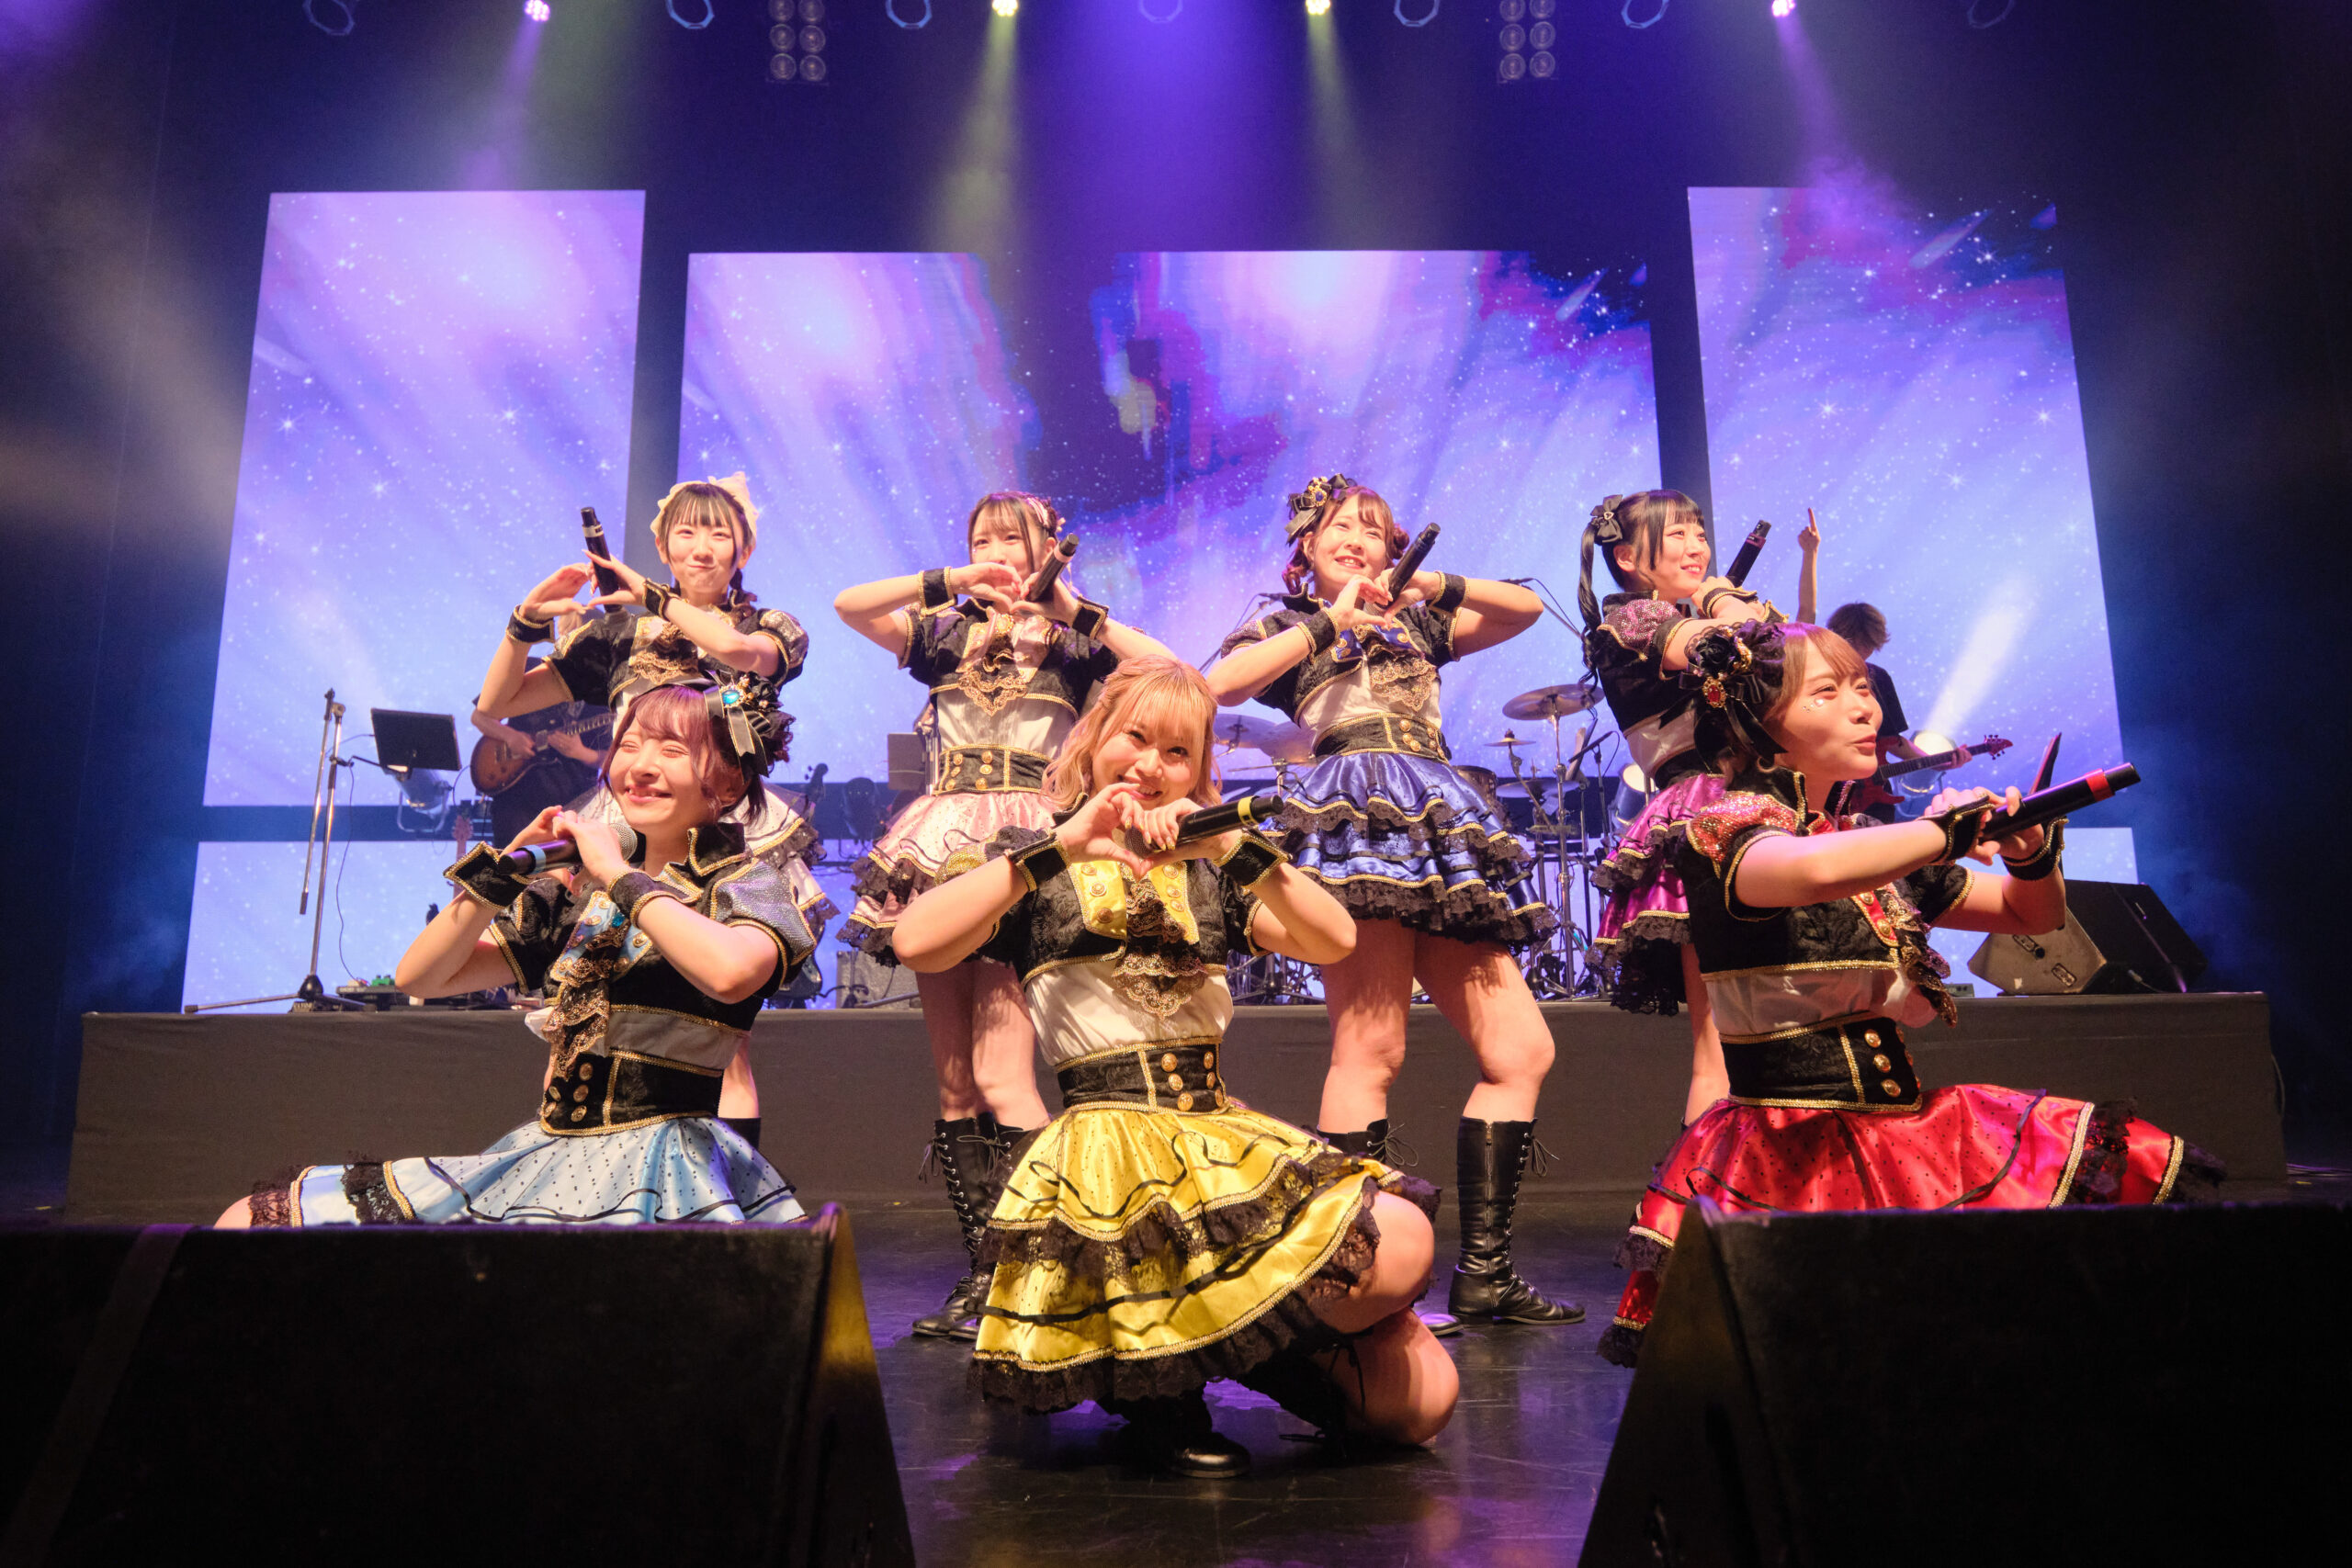 READY TO KISS OGも多数参加!! 牧野広実（READY TO KISS）、約10年間のアイドル人生に華々しくピリオドを打つ。：READY TO KISS